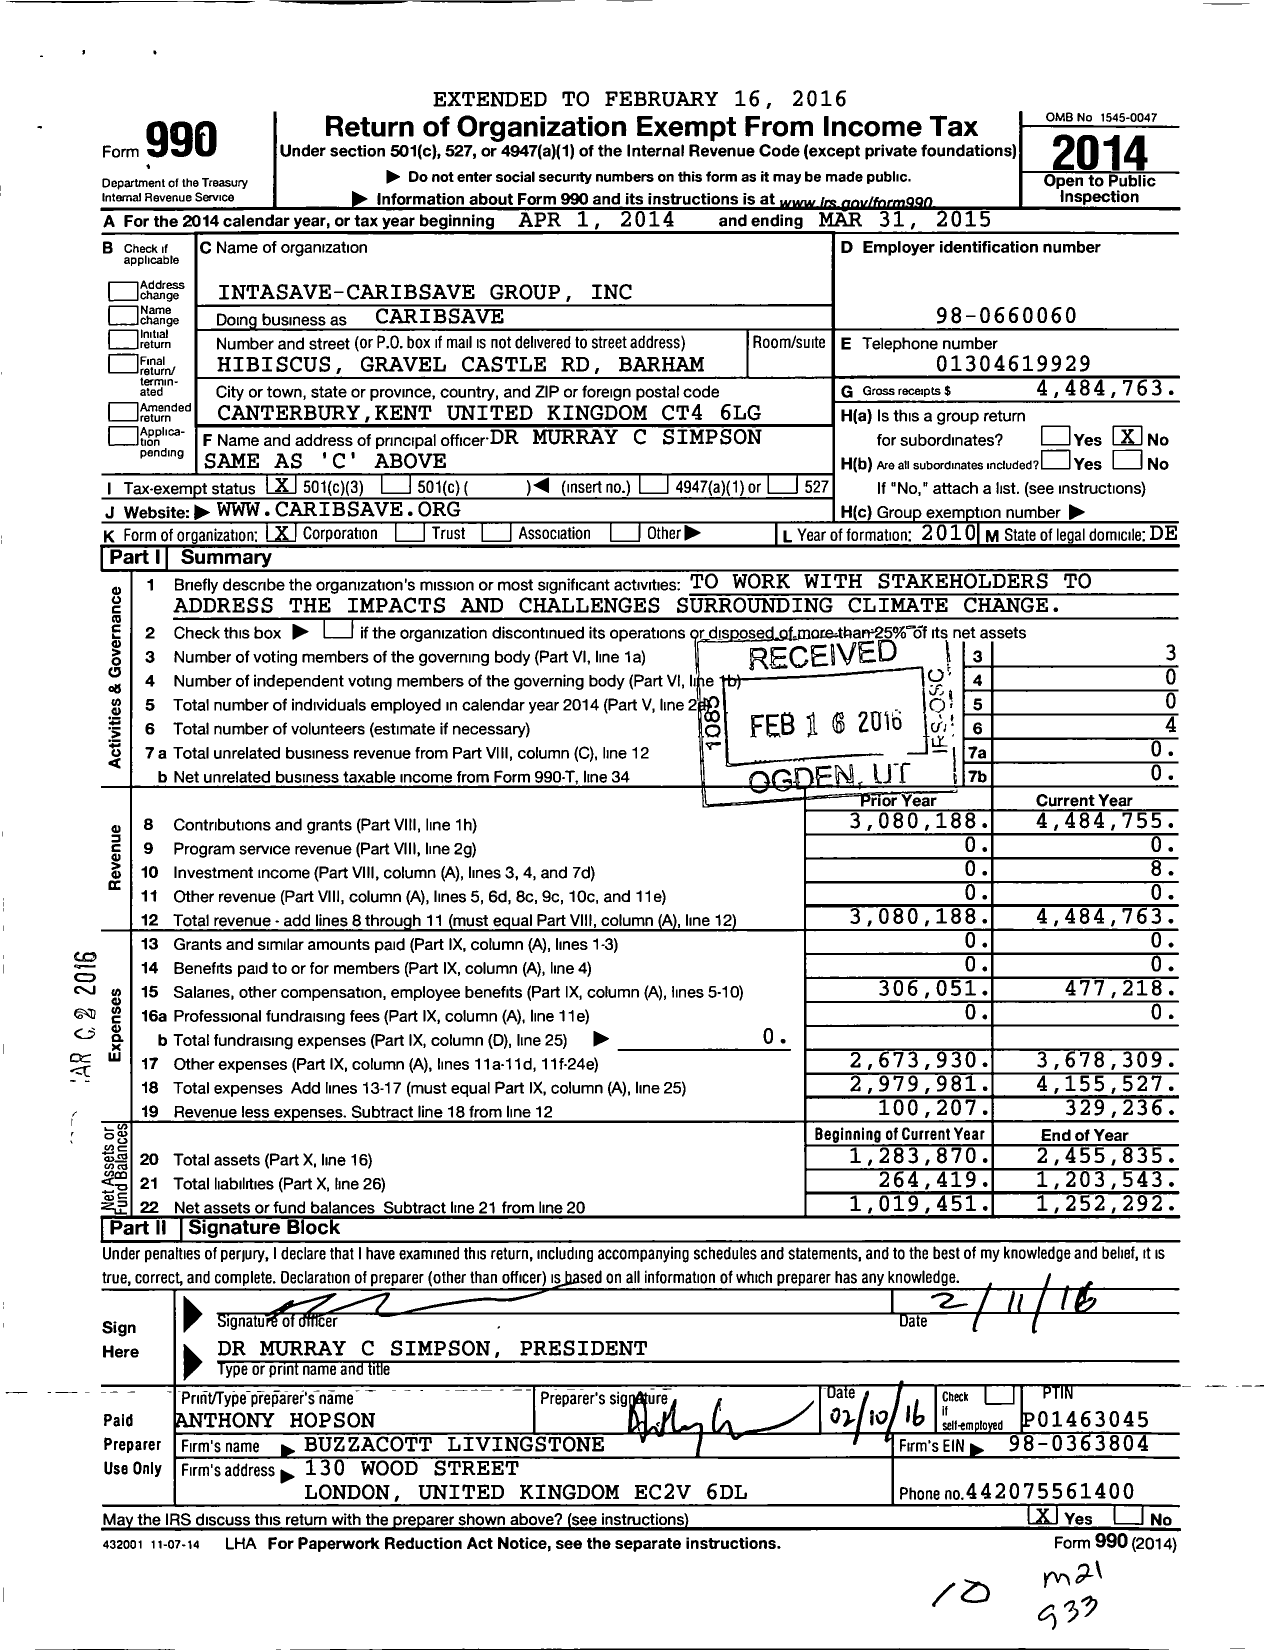 Image of first page of 2014 Form 990 for Intasave Caribsave Group